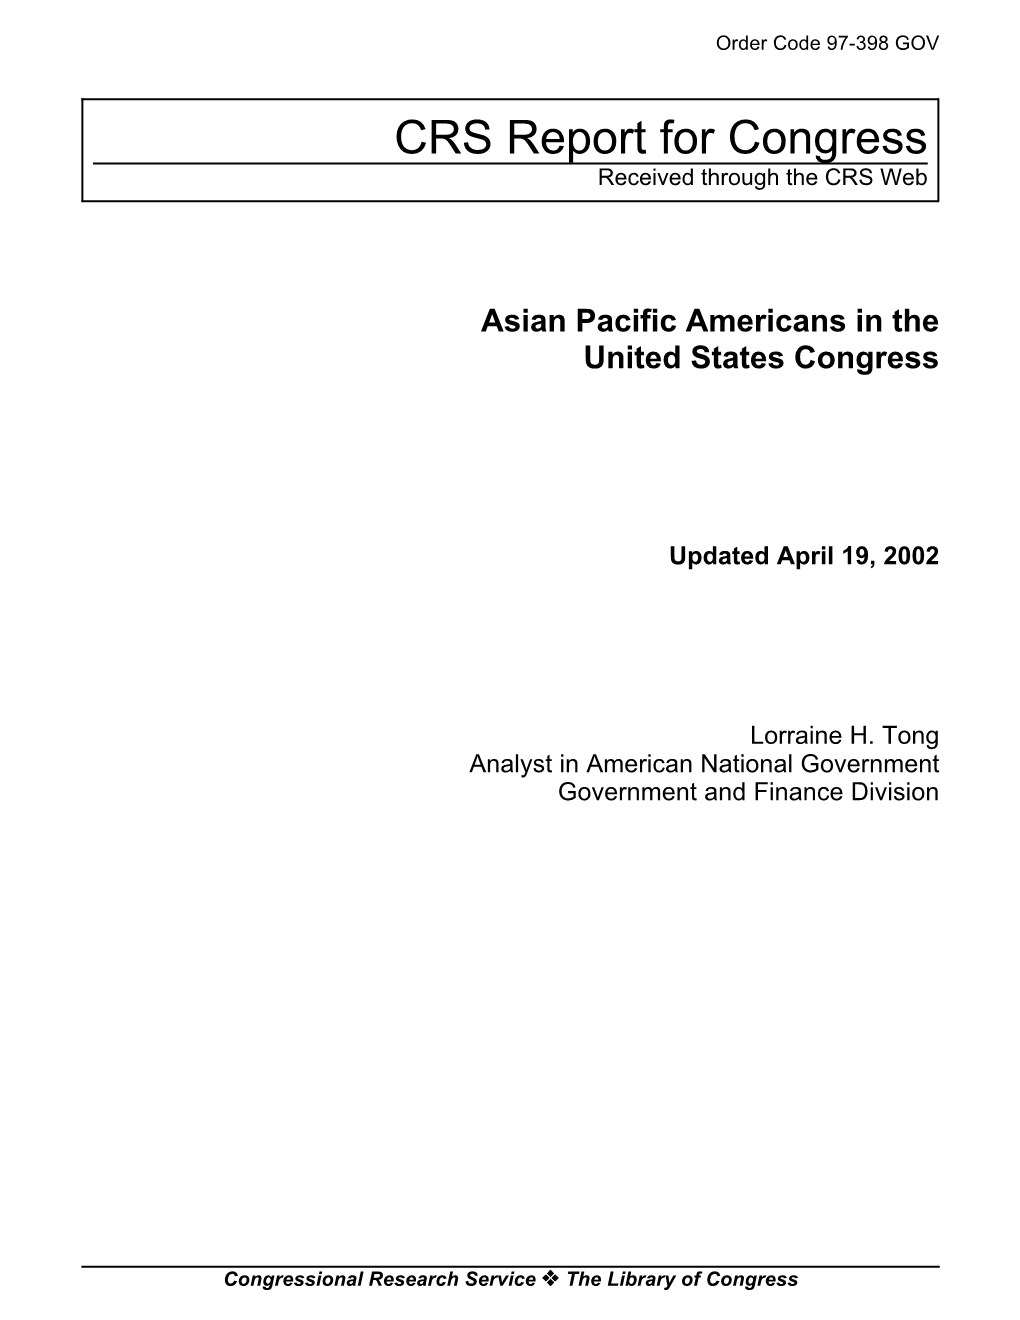 Asian Pacific Americans in the United States Congress